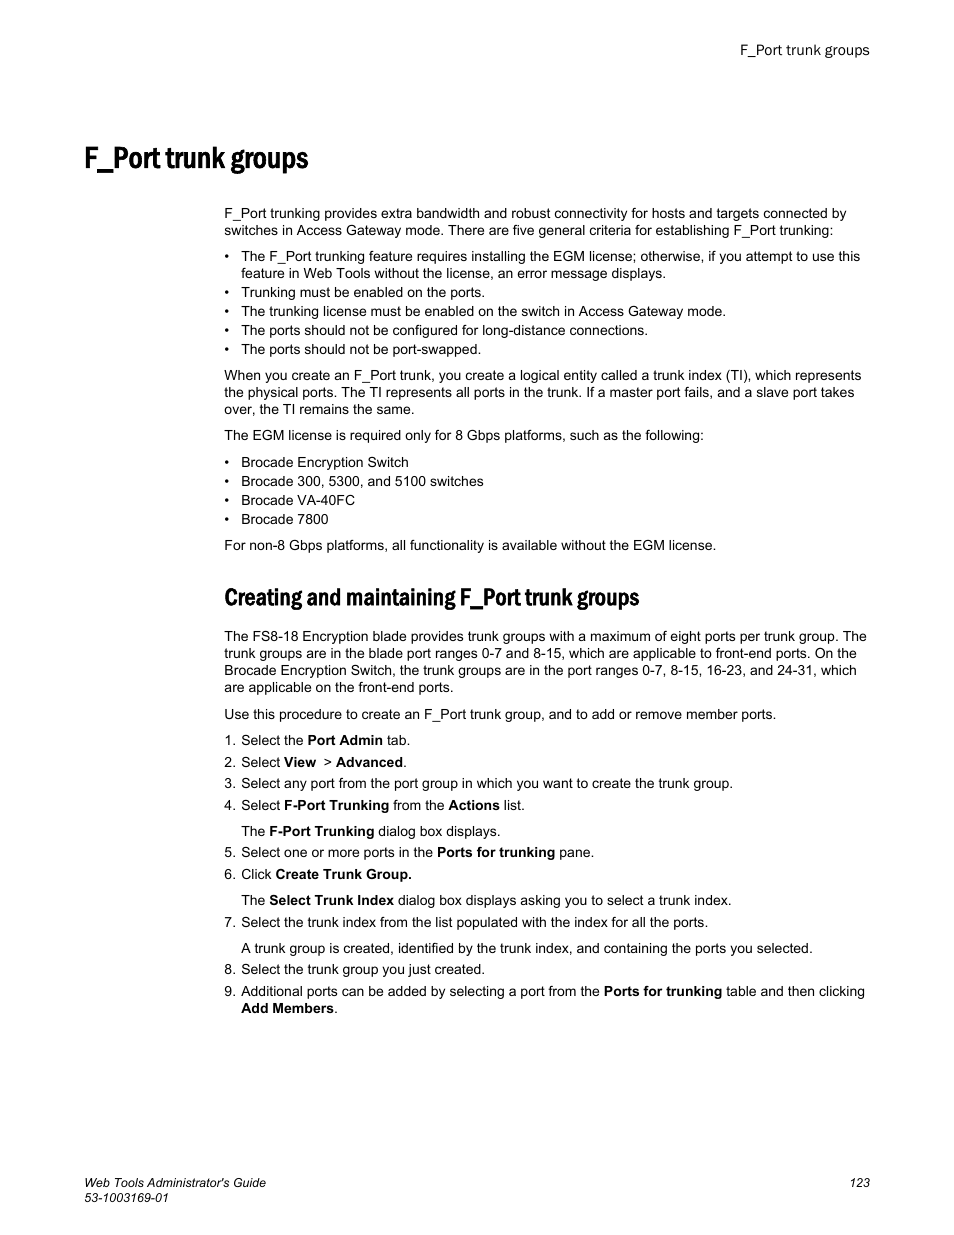 F_port trunk groups, Creating and maintaining f_port trunk groups | Brocade  Web Tools Administrators Guide (Supporting Fabric OS v7.3.0) User Manual |  Page 123 / 274